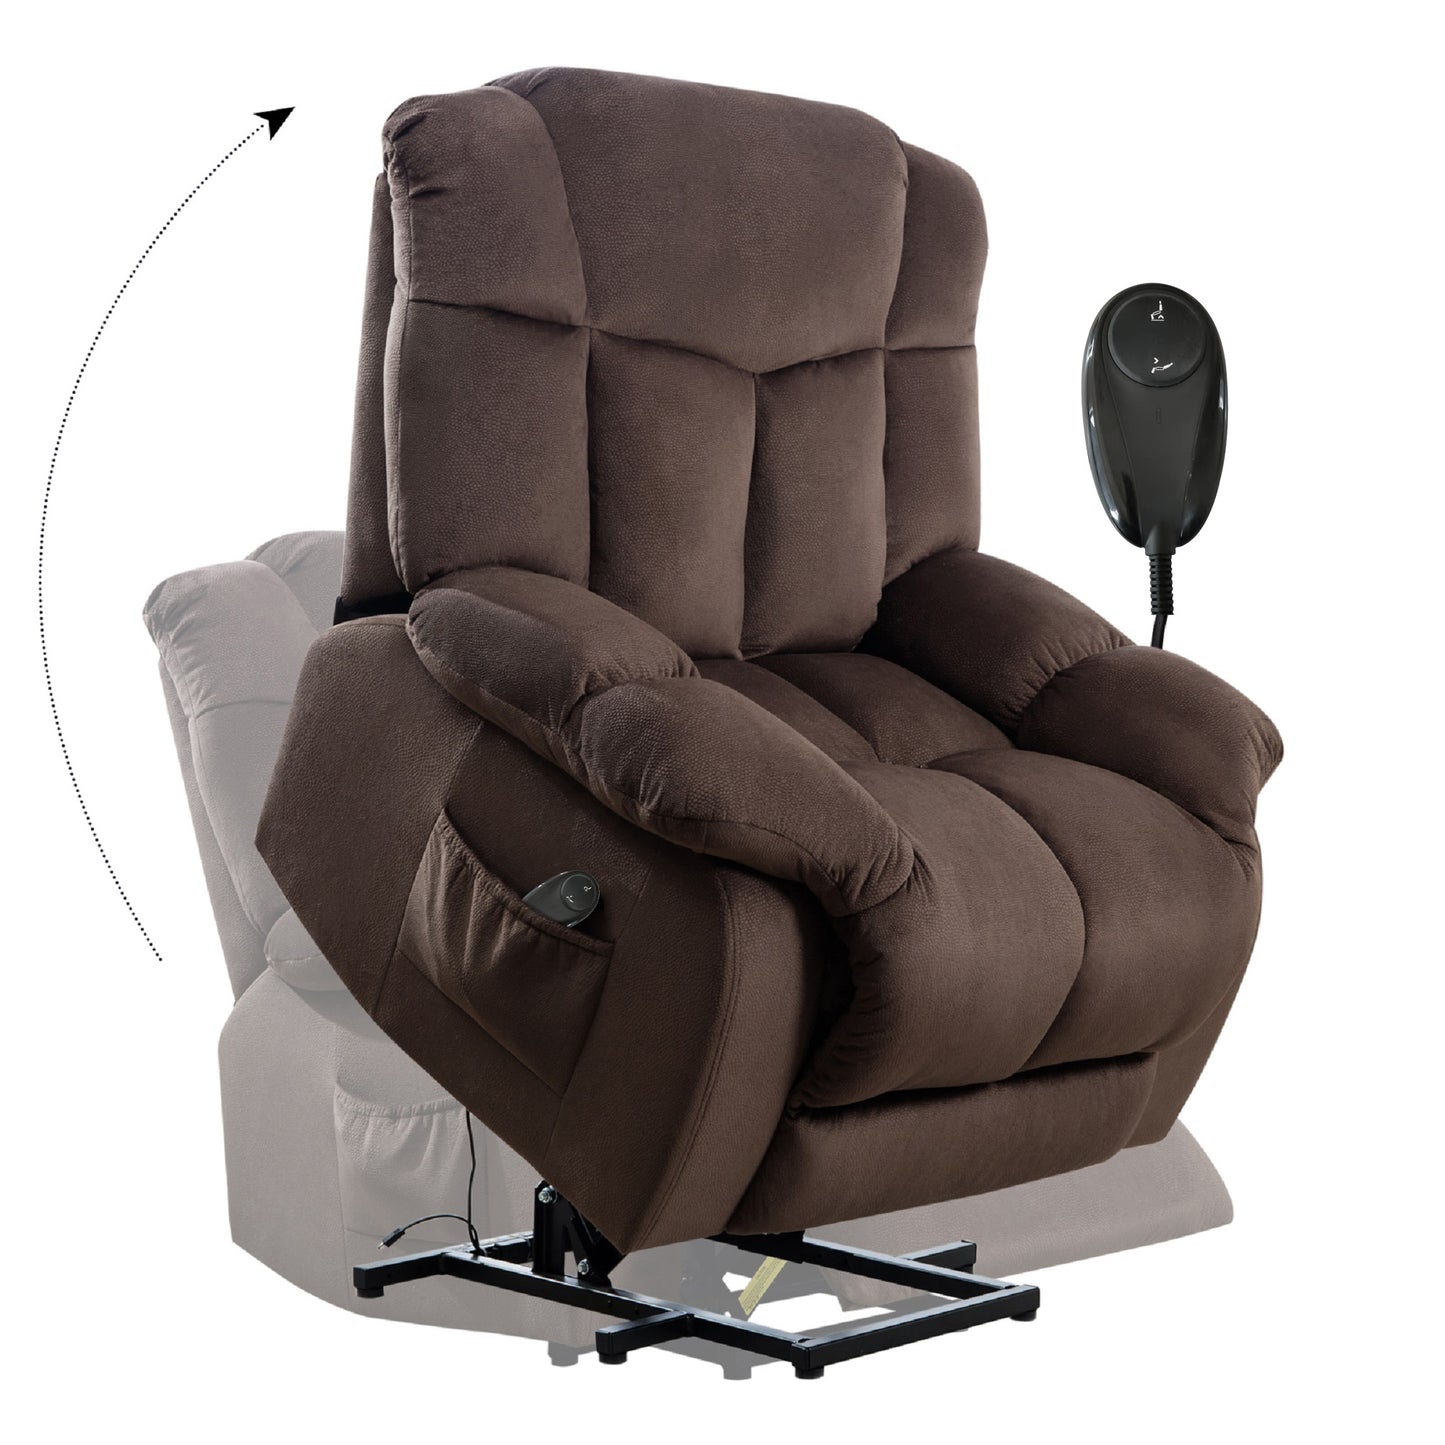 Electric Massage Chair with Remote Control, Power Lift Recliner Chair with Heat Therapy and Massage Function, Home Furniture Elderly Single Recliner Sofa for Living Room Bedroom, Brown